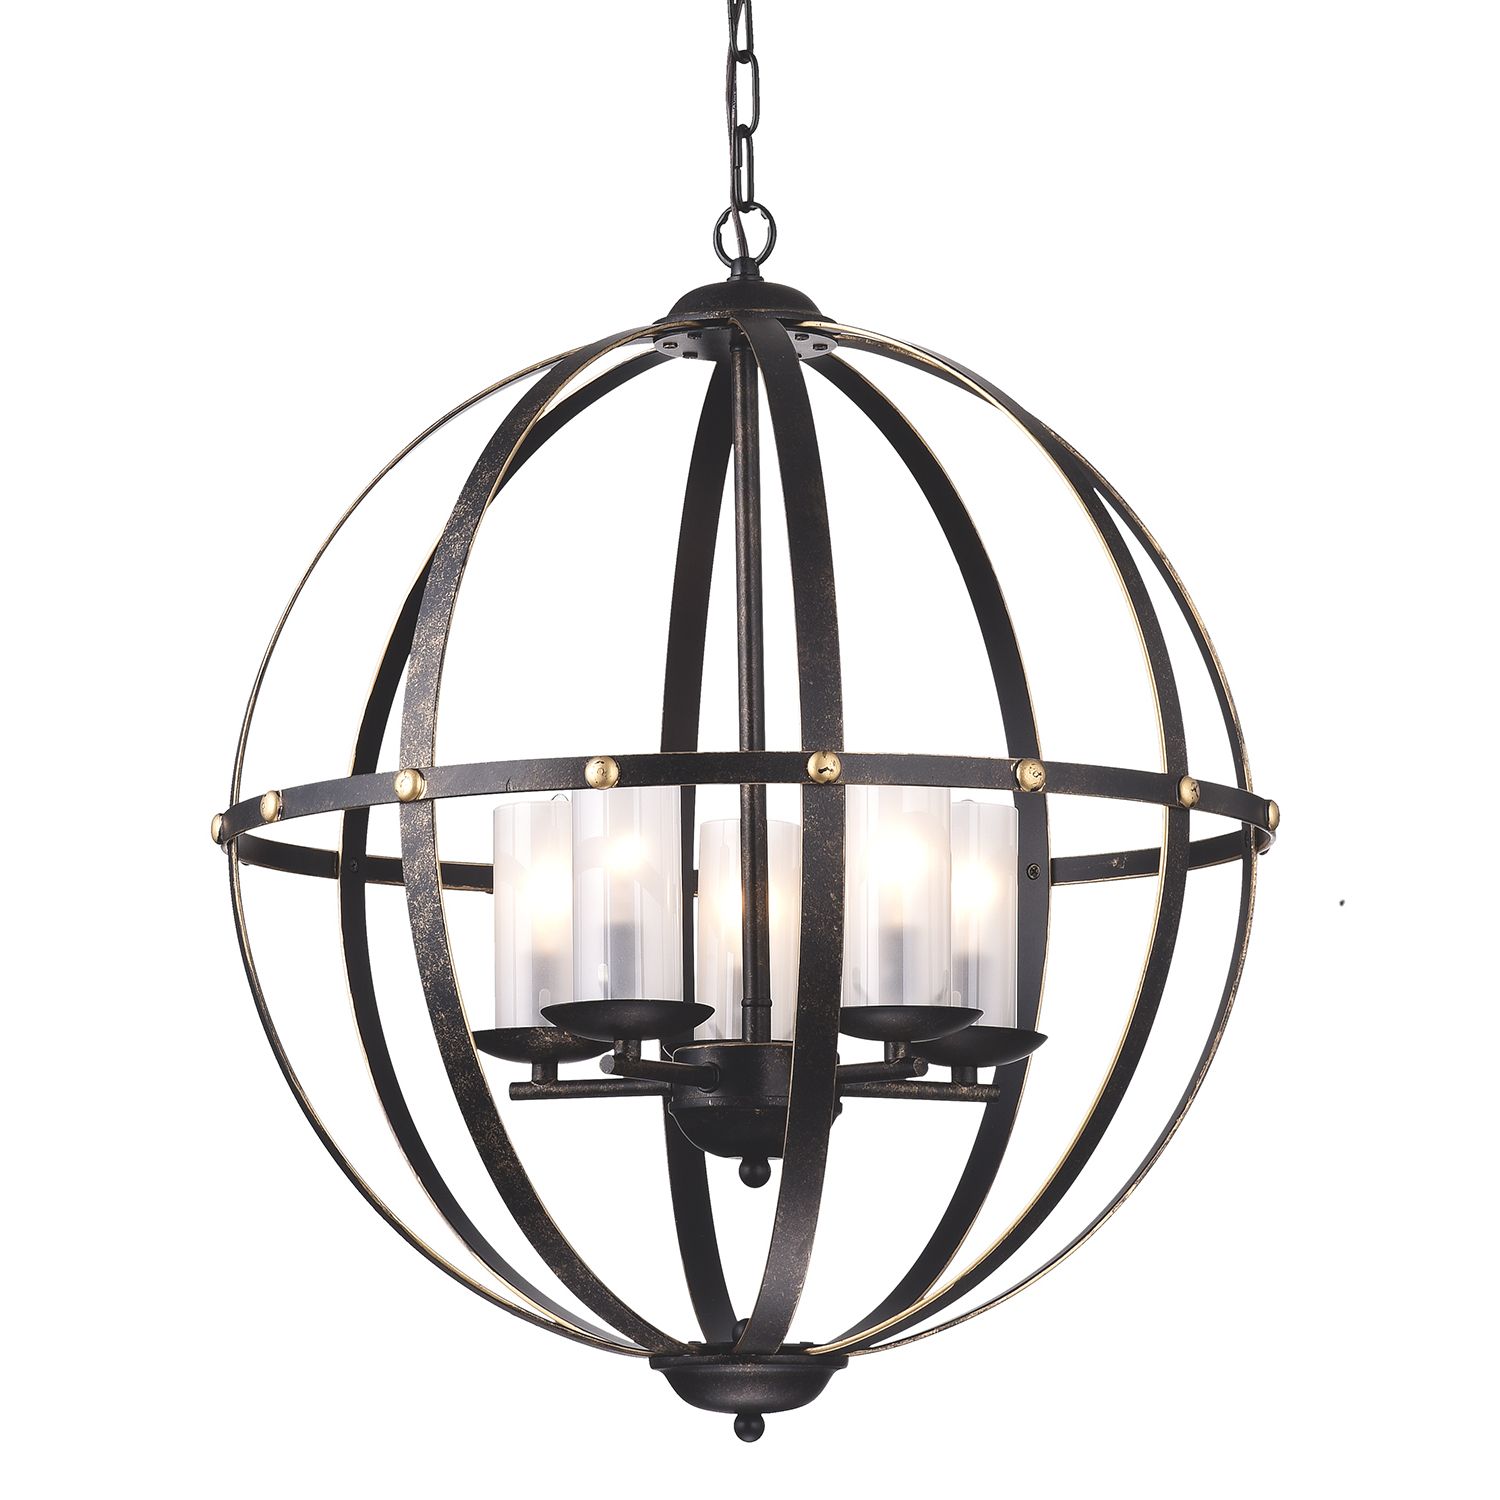 5 Light Antique Bronze Globe Sphere Orb Cage Chandelier With Regard To Most Current Bronze Sphere Foyer Pendant (View 4 of 20)